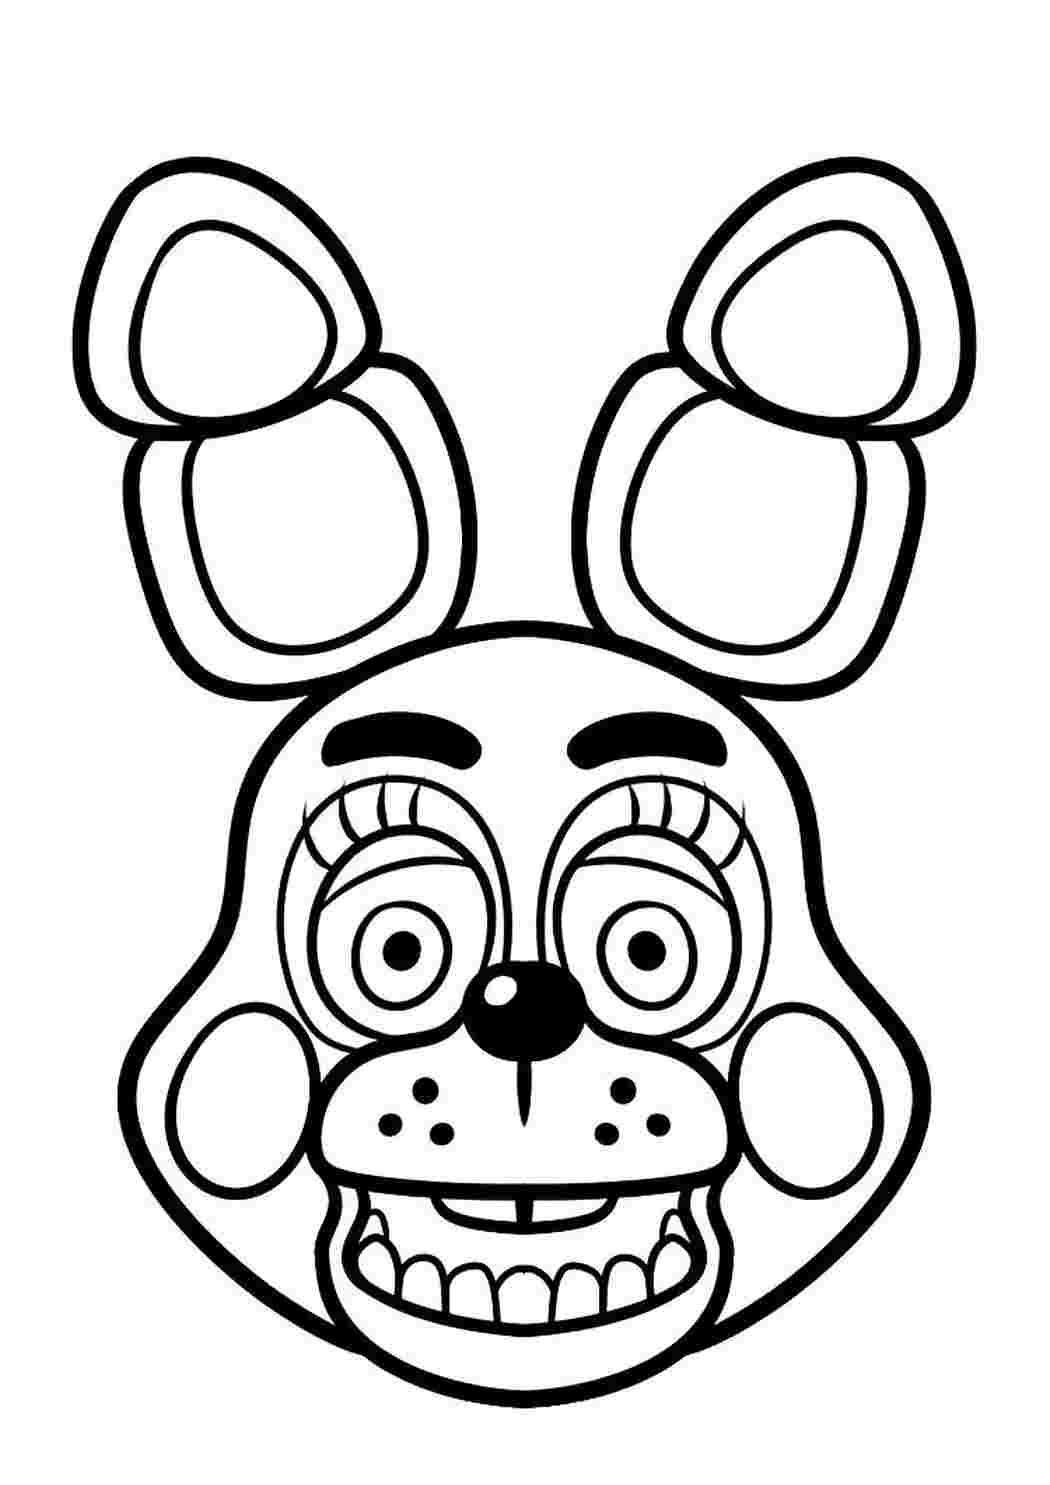 Toy Bonnie Coloring Pages